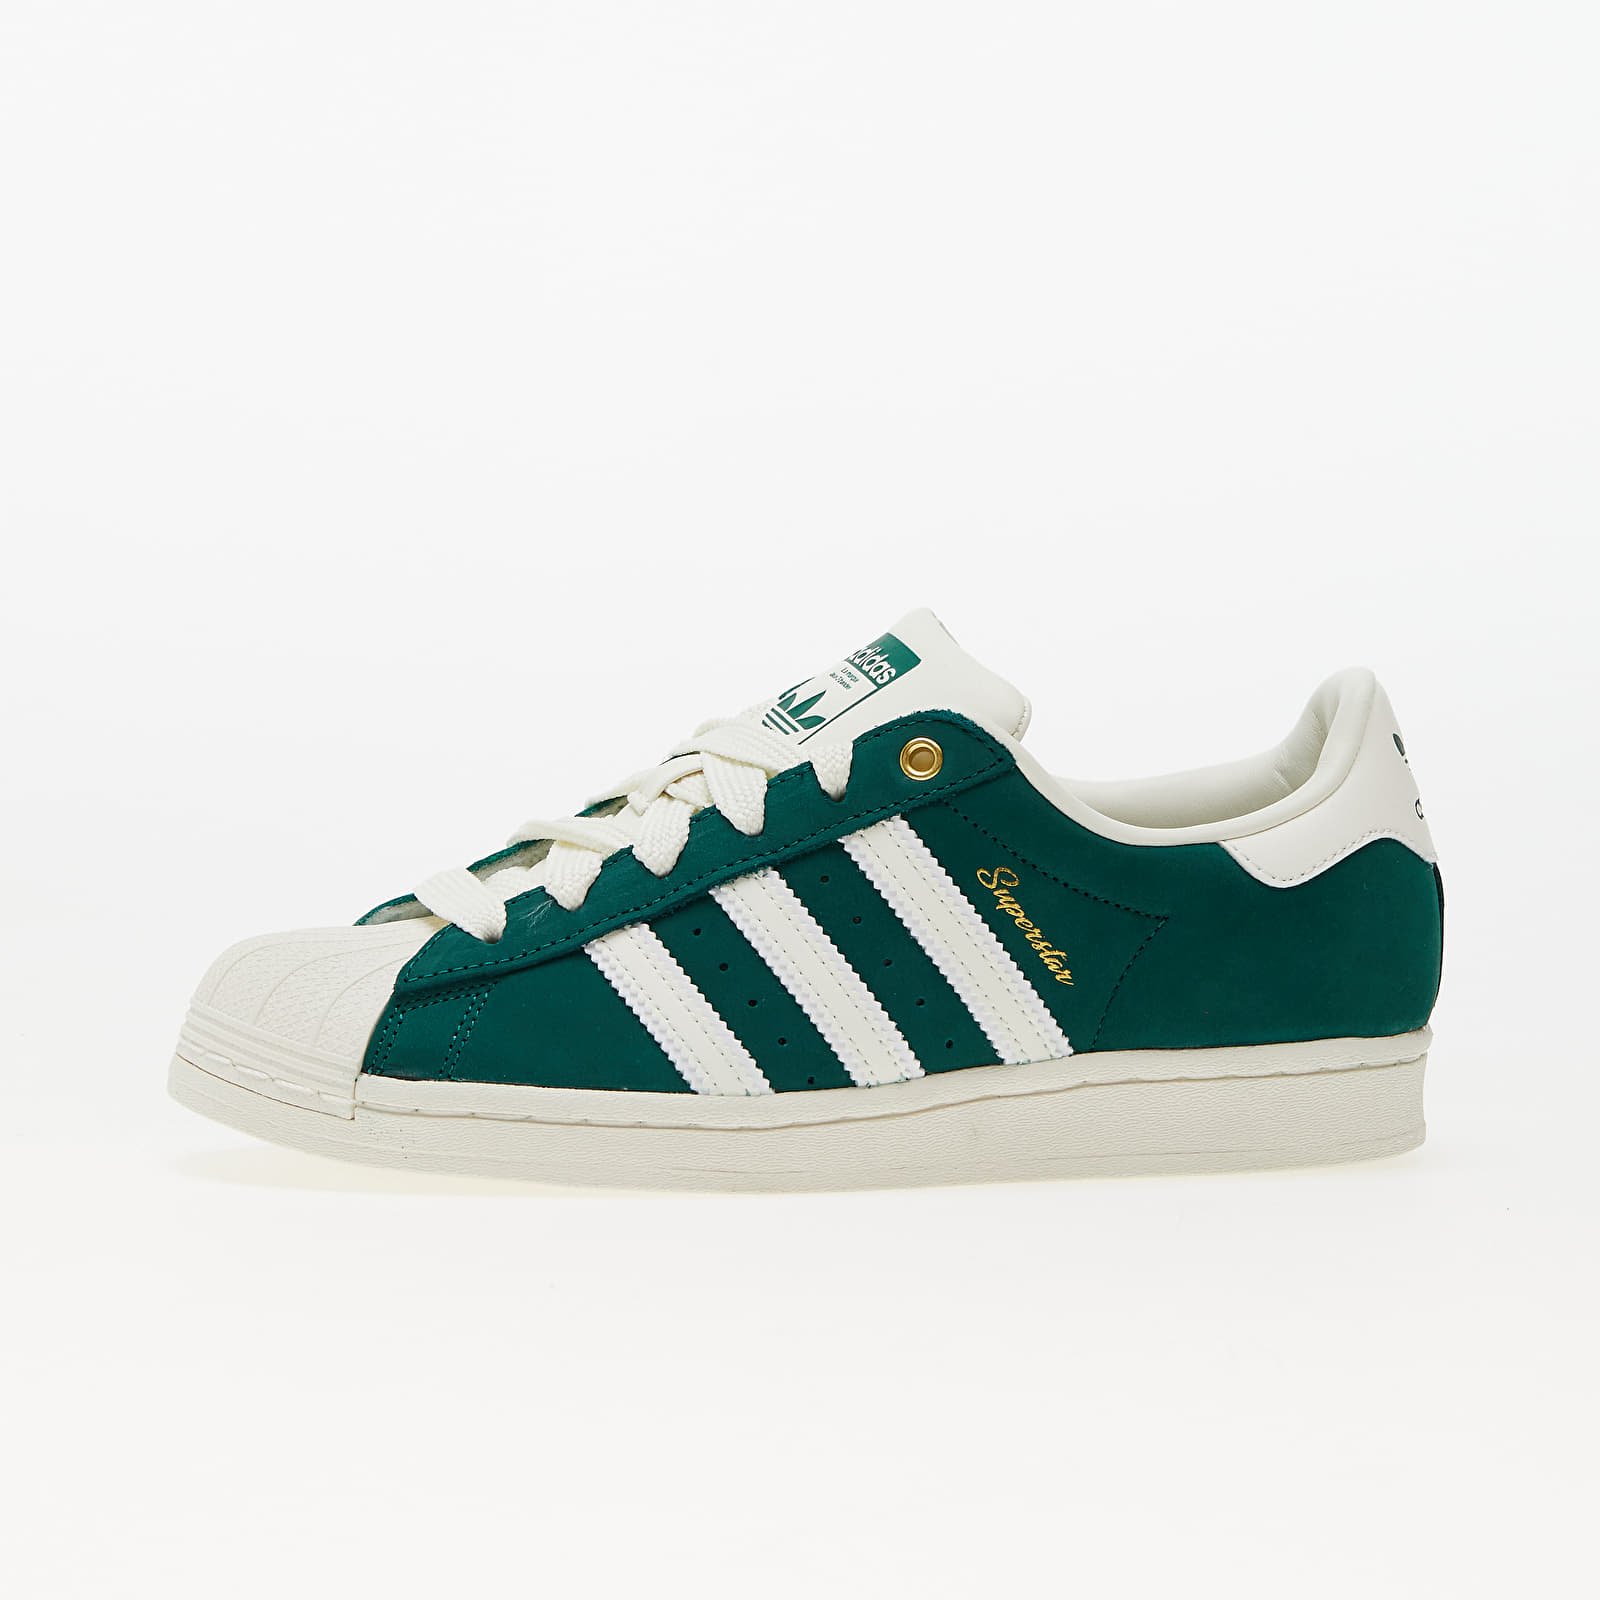 Women's shoes adidas Superstar W Secogr/ Collegiate Green/ Off White